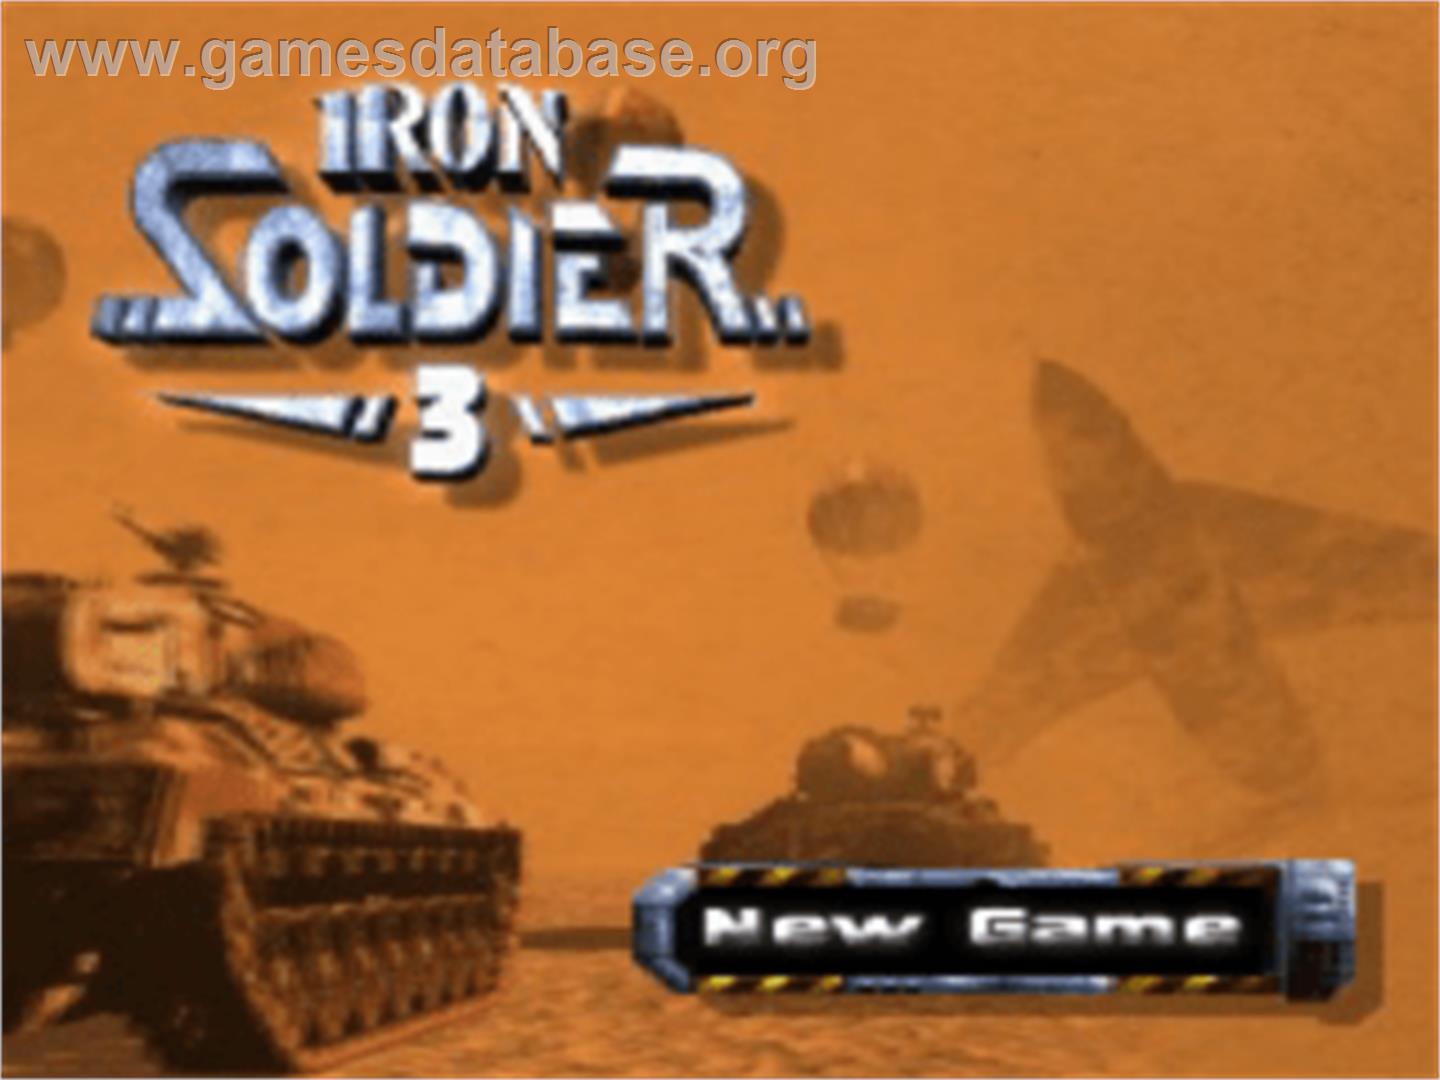 Iron Soldier 3 - Sony Playstation - Artwork - Title Screen